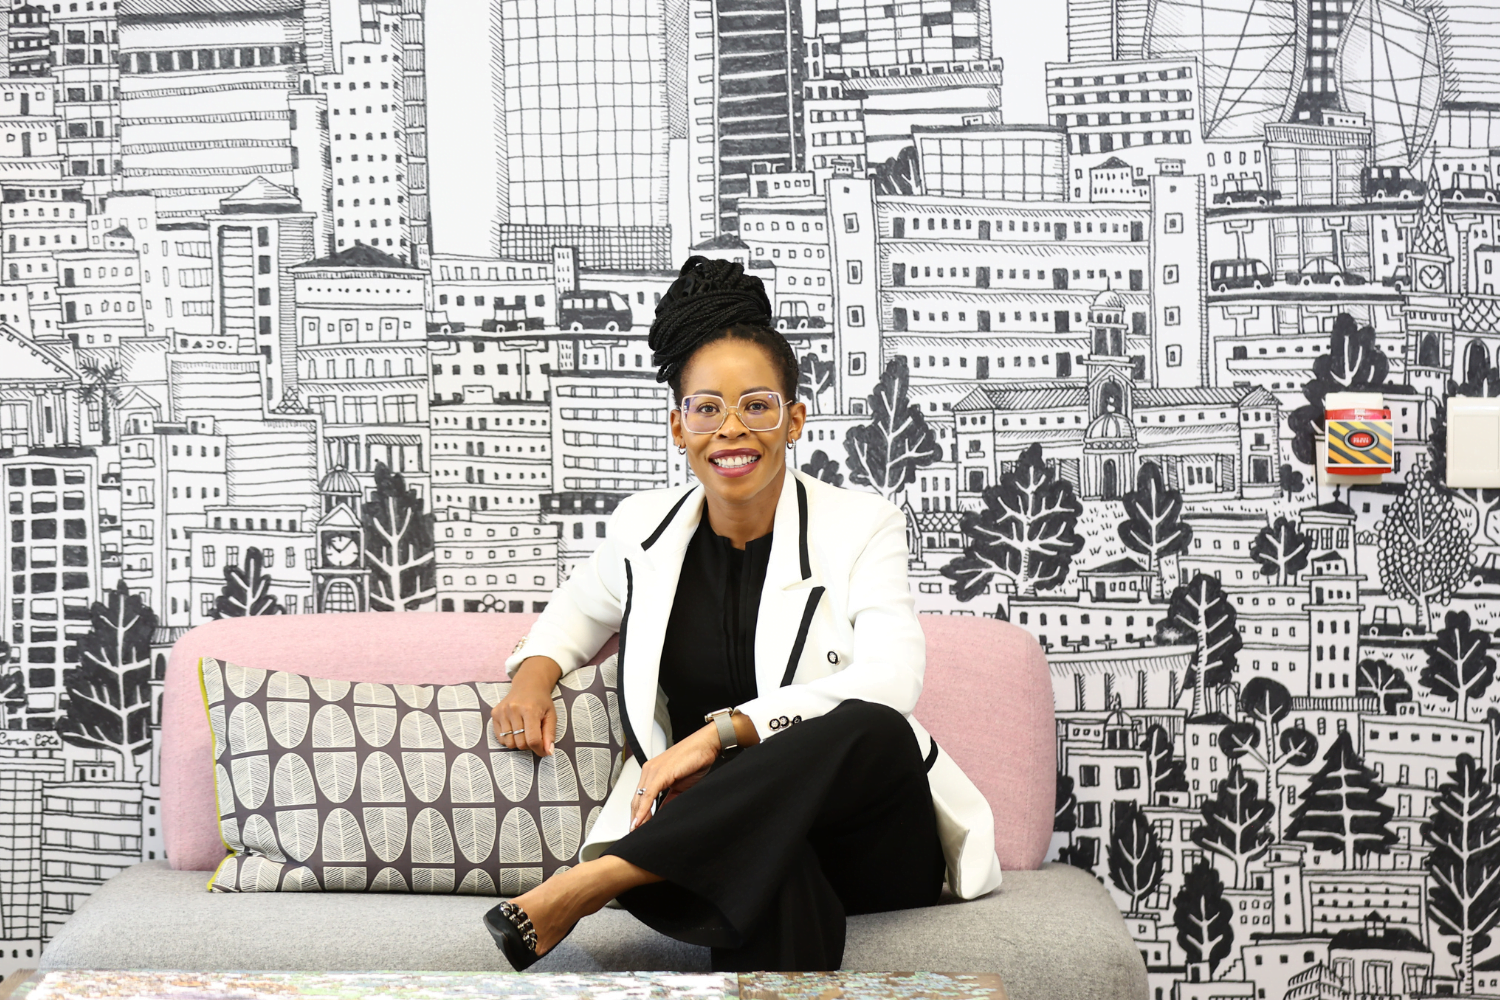 Queen Mokulubete, Founder of Somila Engineering, poses on a sofa in her office.